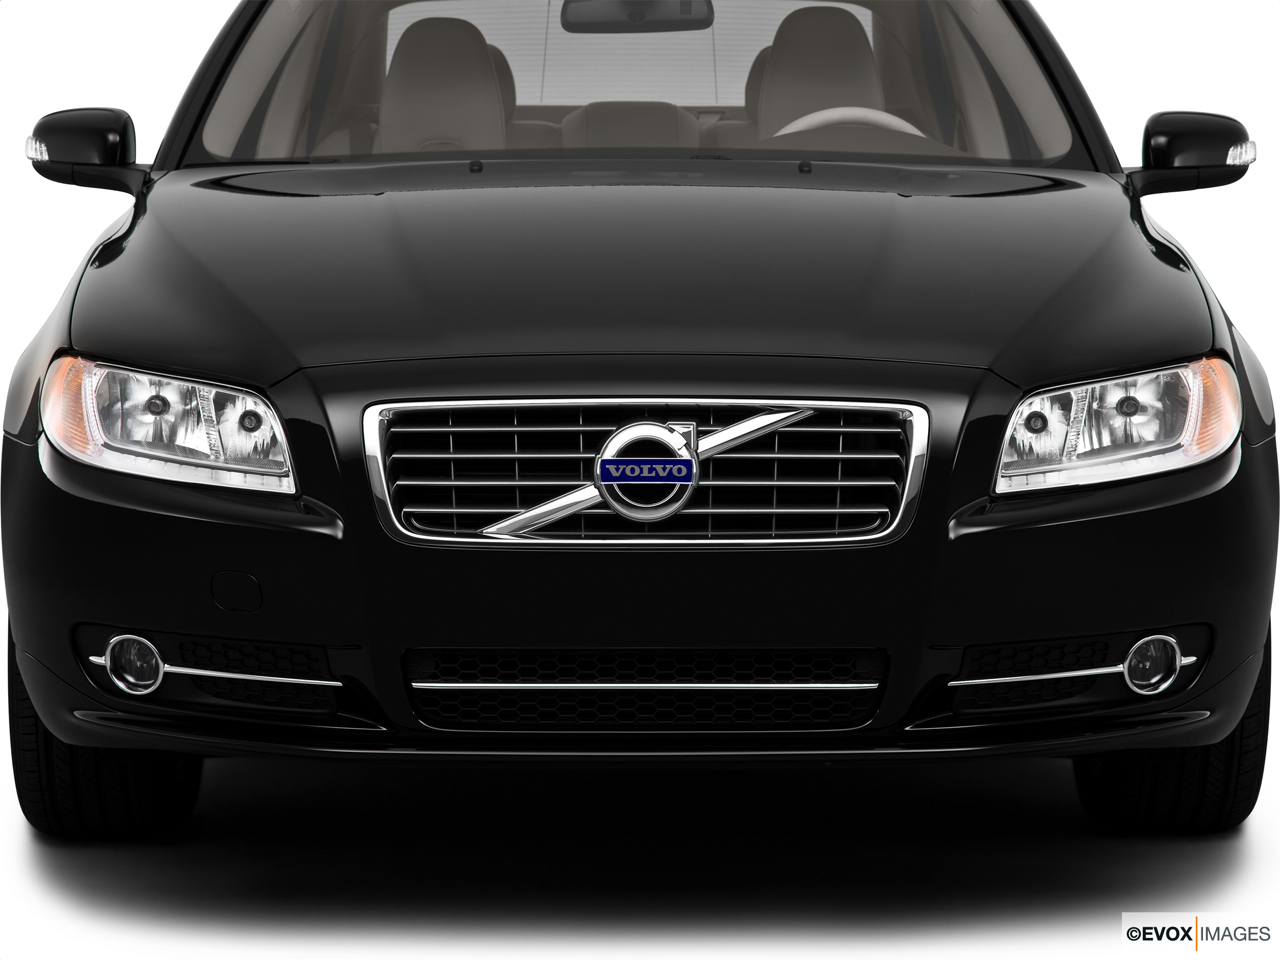 2010 Volvo S80 3.2 Close up of Grill. 